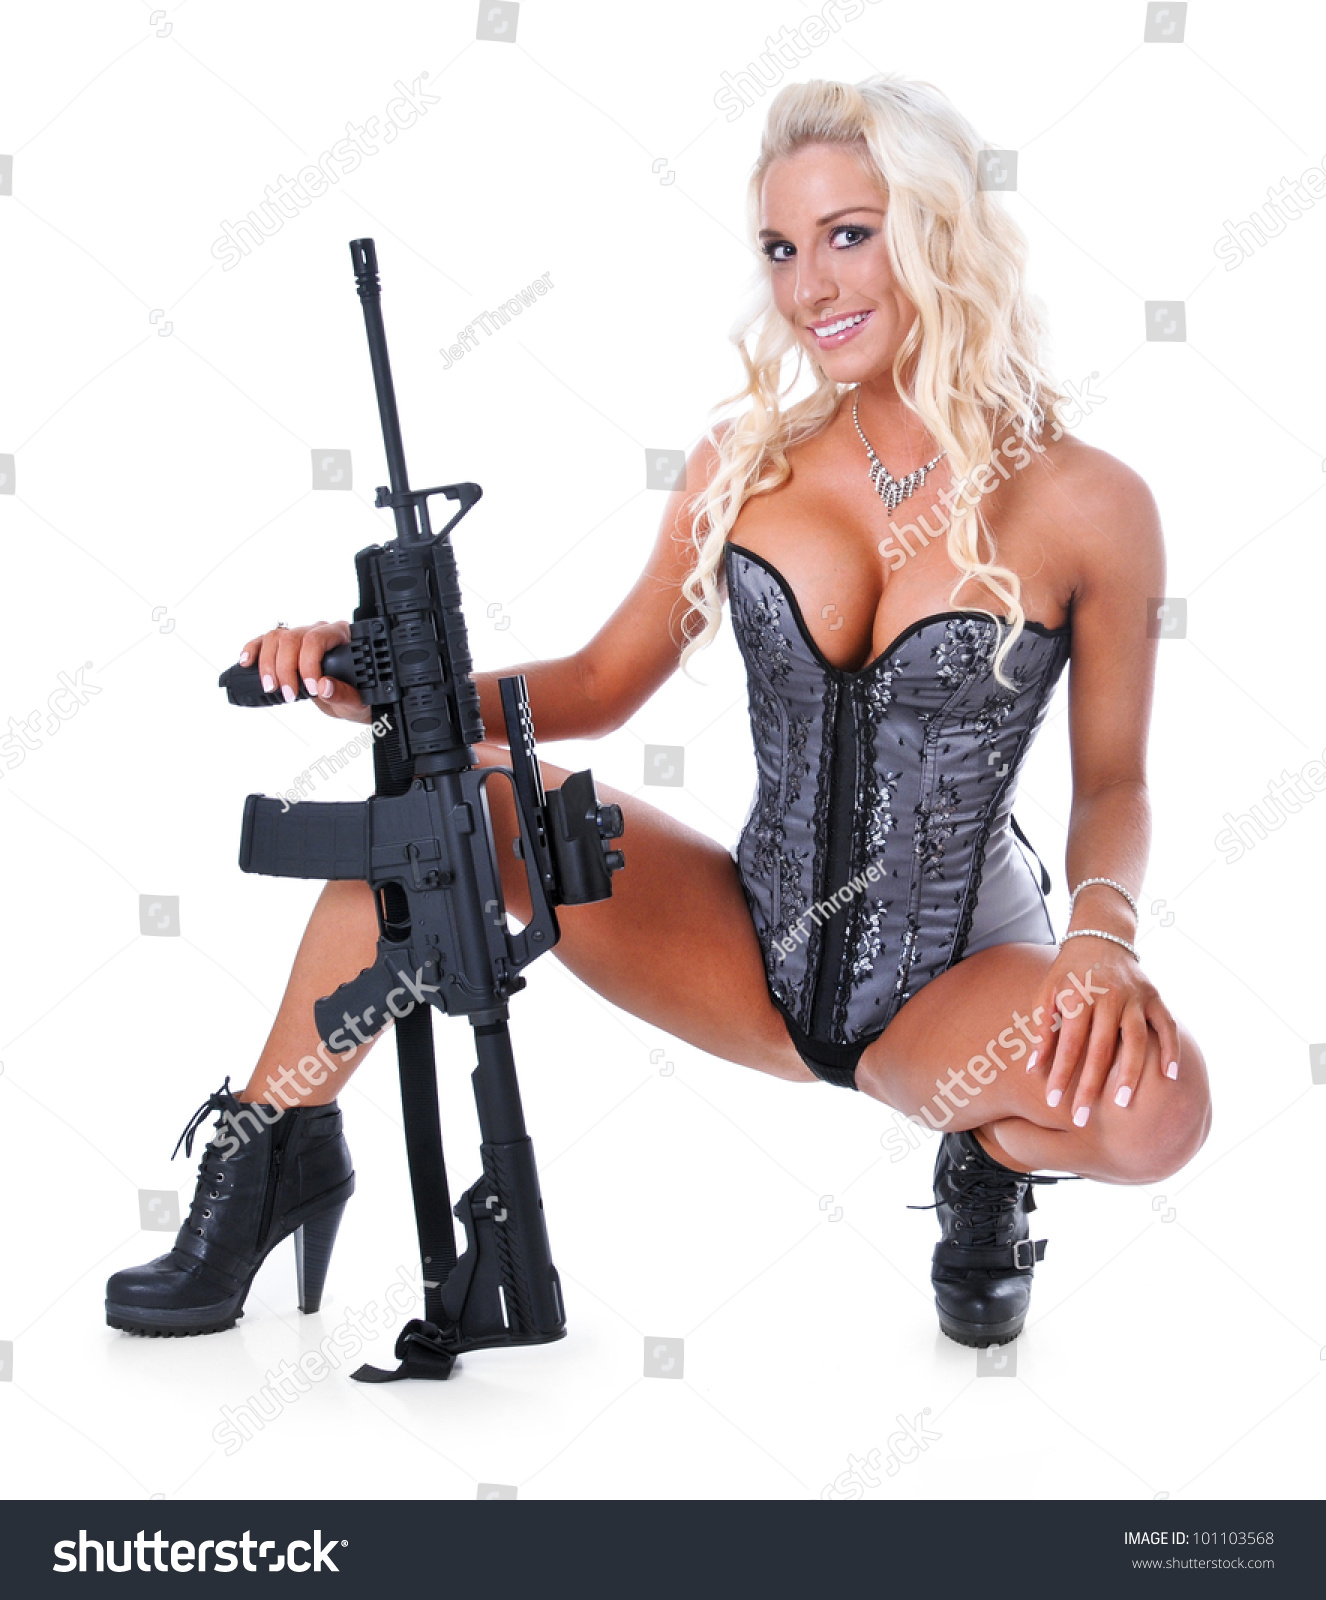 [Image: stock-photo-sexy-blonde-girl-holding-a-g...103568.jpg]